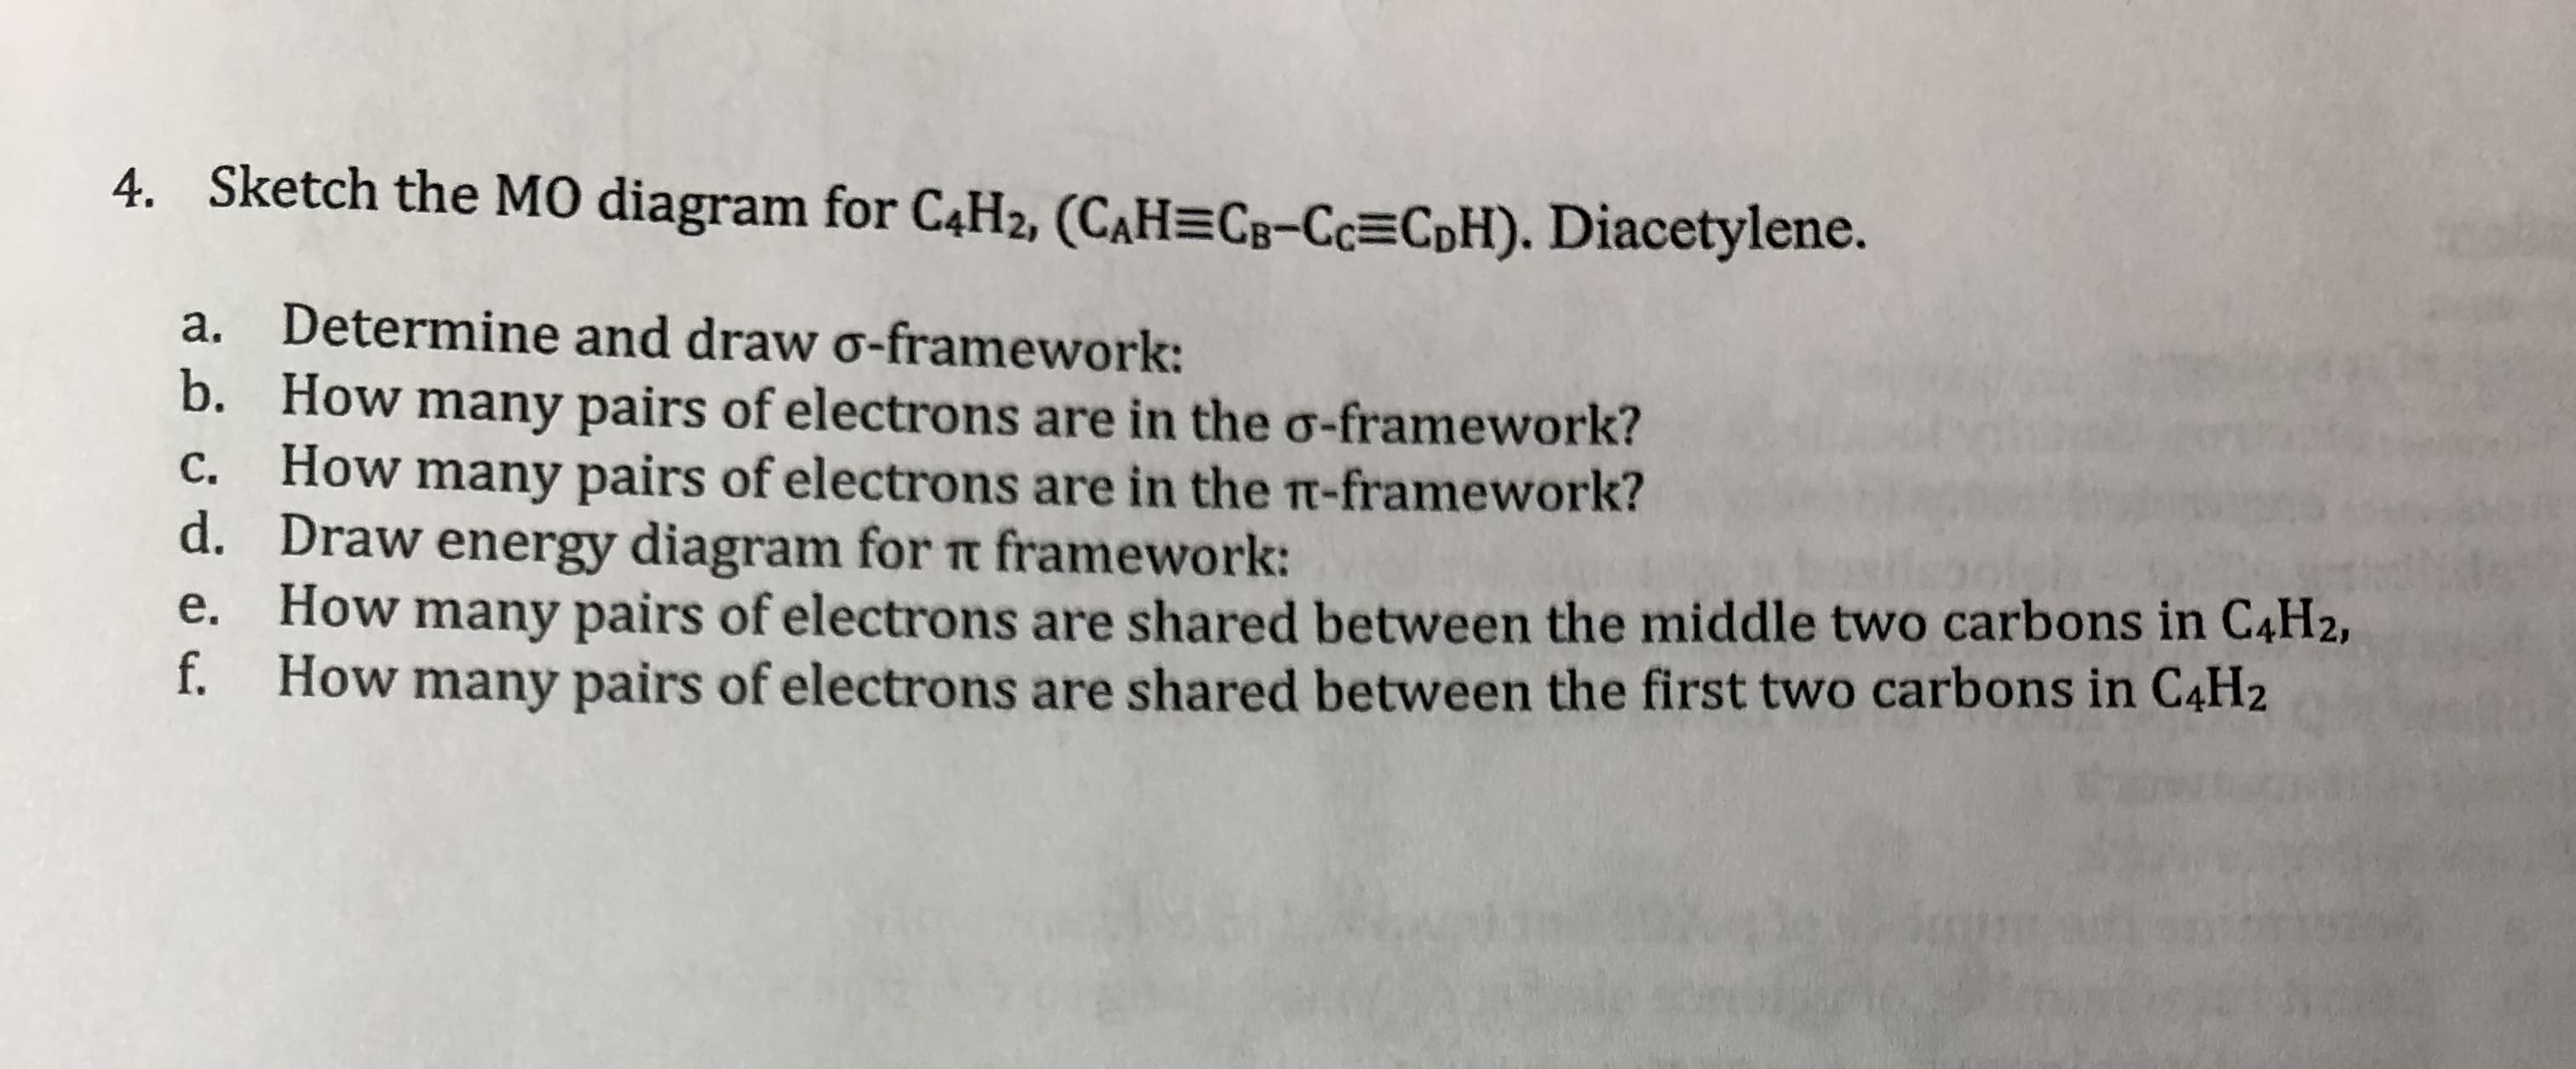 4.
Sketch the MO diagram for C4H2, (CAH-CB-C㎝CoH). Diacetylene.
a.
Determine and draw-framework:
b.
How many pairs of electrons are in the σ-framework?
How many pairs of electrons are in the π-framework?
d. Draw energy diagram for Tt framework:
e. How many pairs of electrons are shared between the middle two carbons in C4H2,
f. How many pairs of electrons are shared between the first two carbons in CaH2
c.
